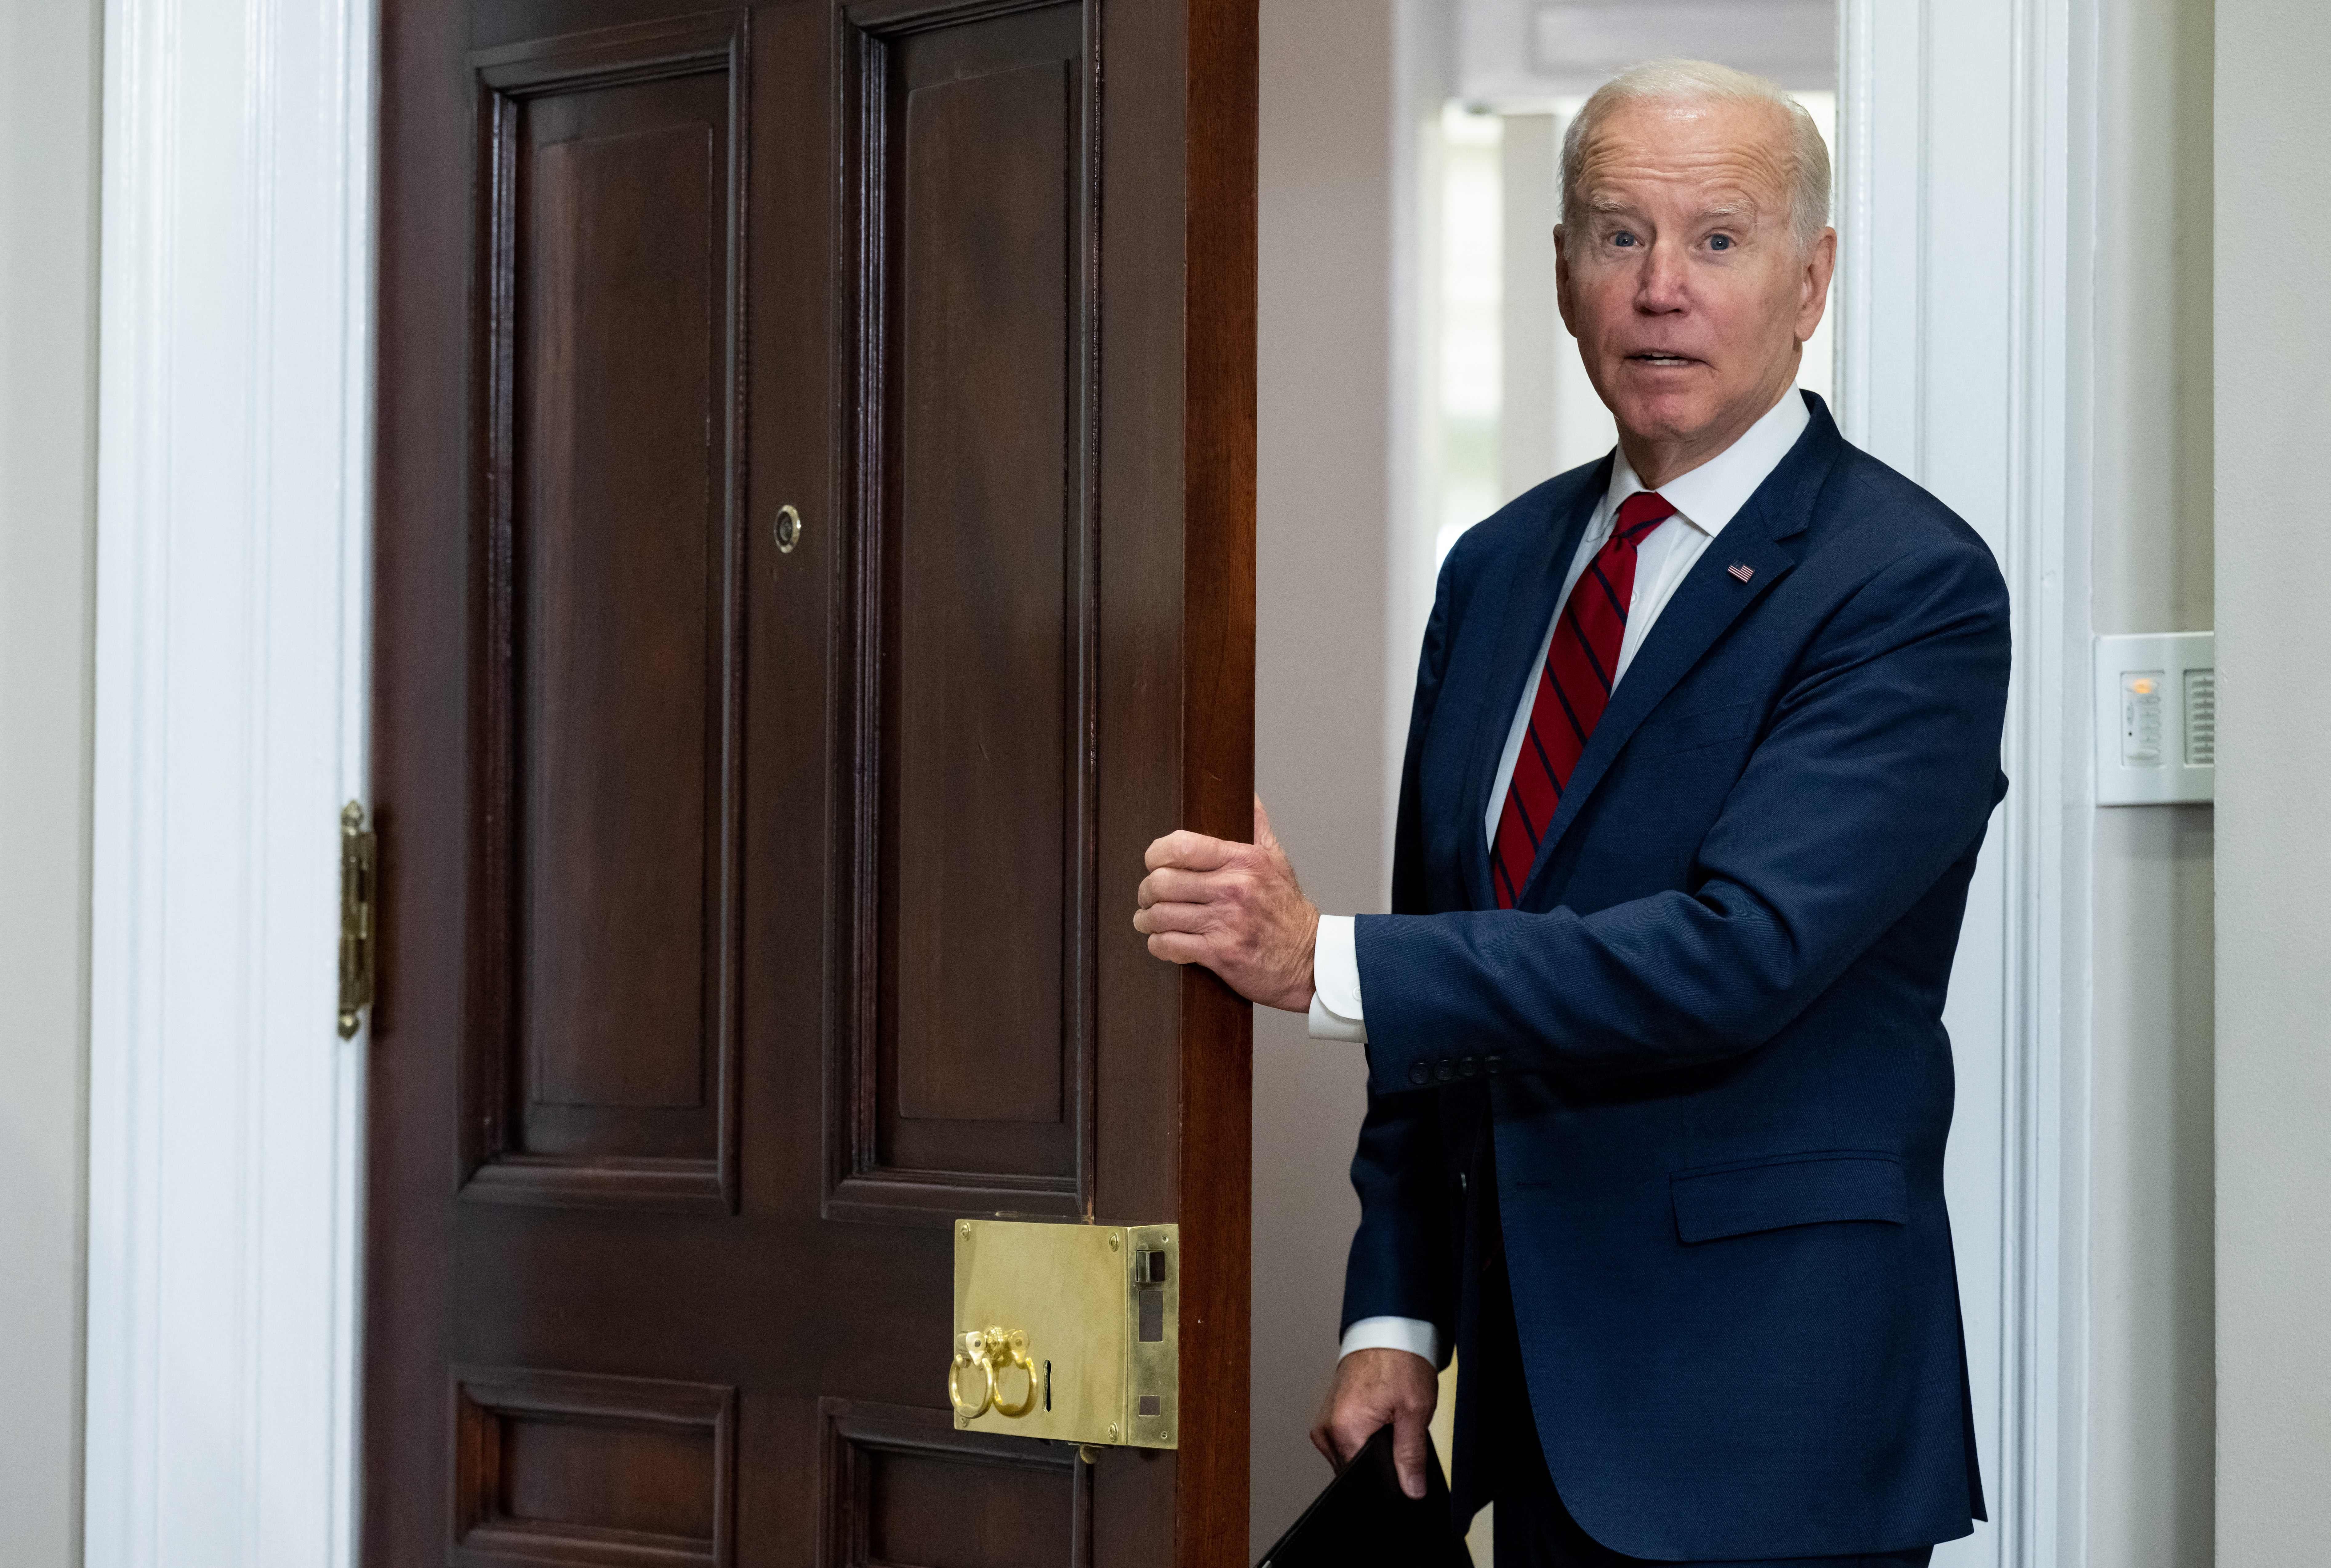 Biden holding onto the edge of a door, opening his mouth. 